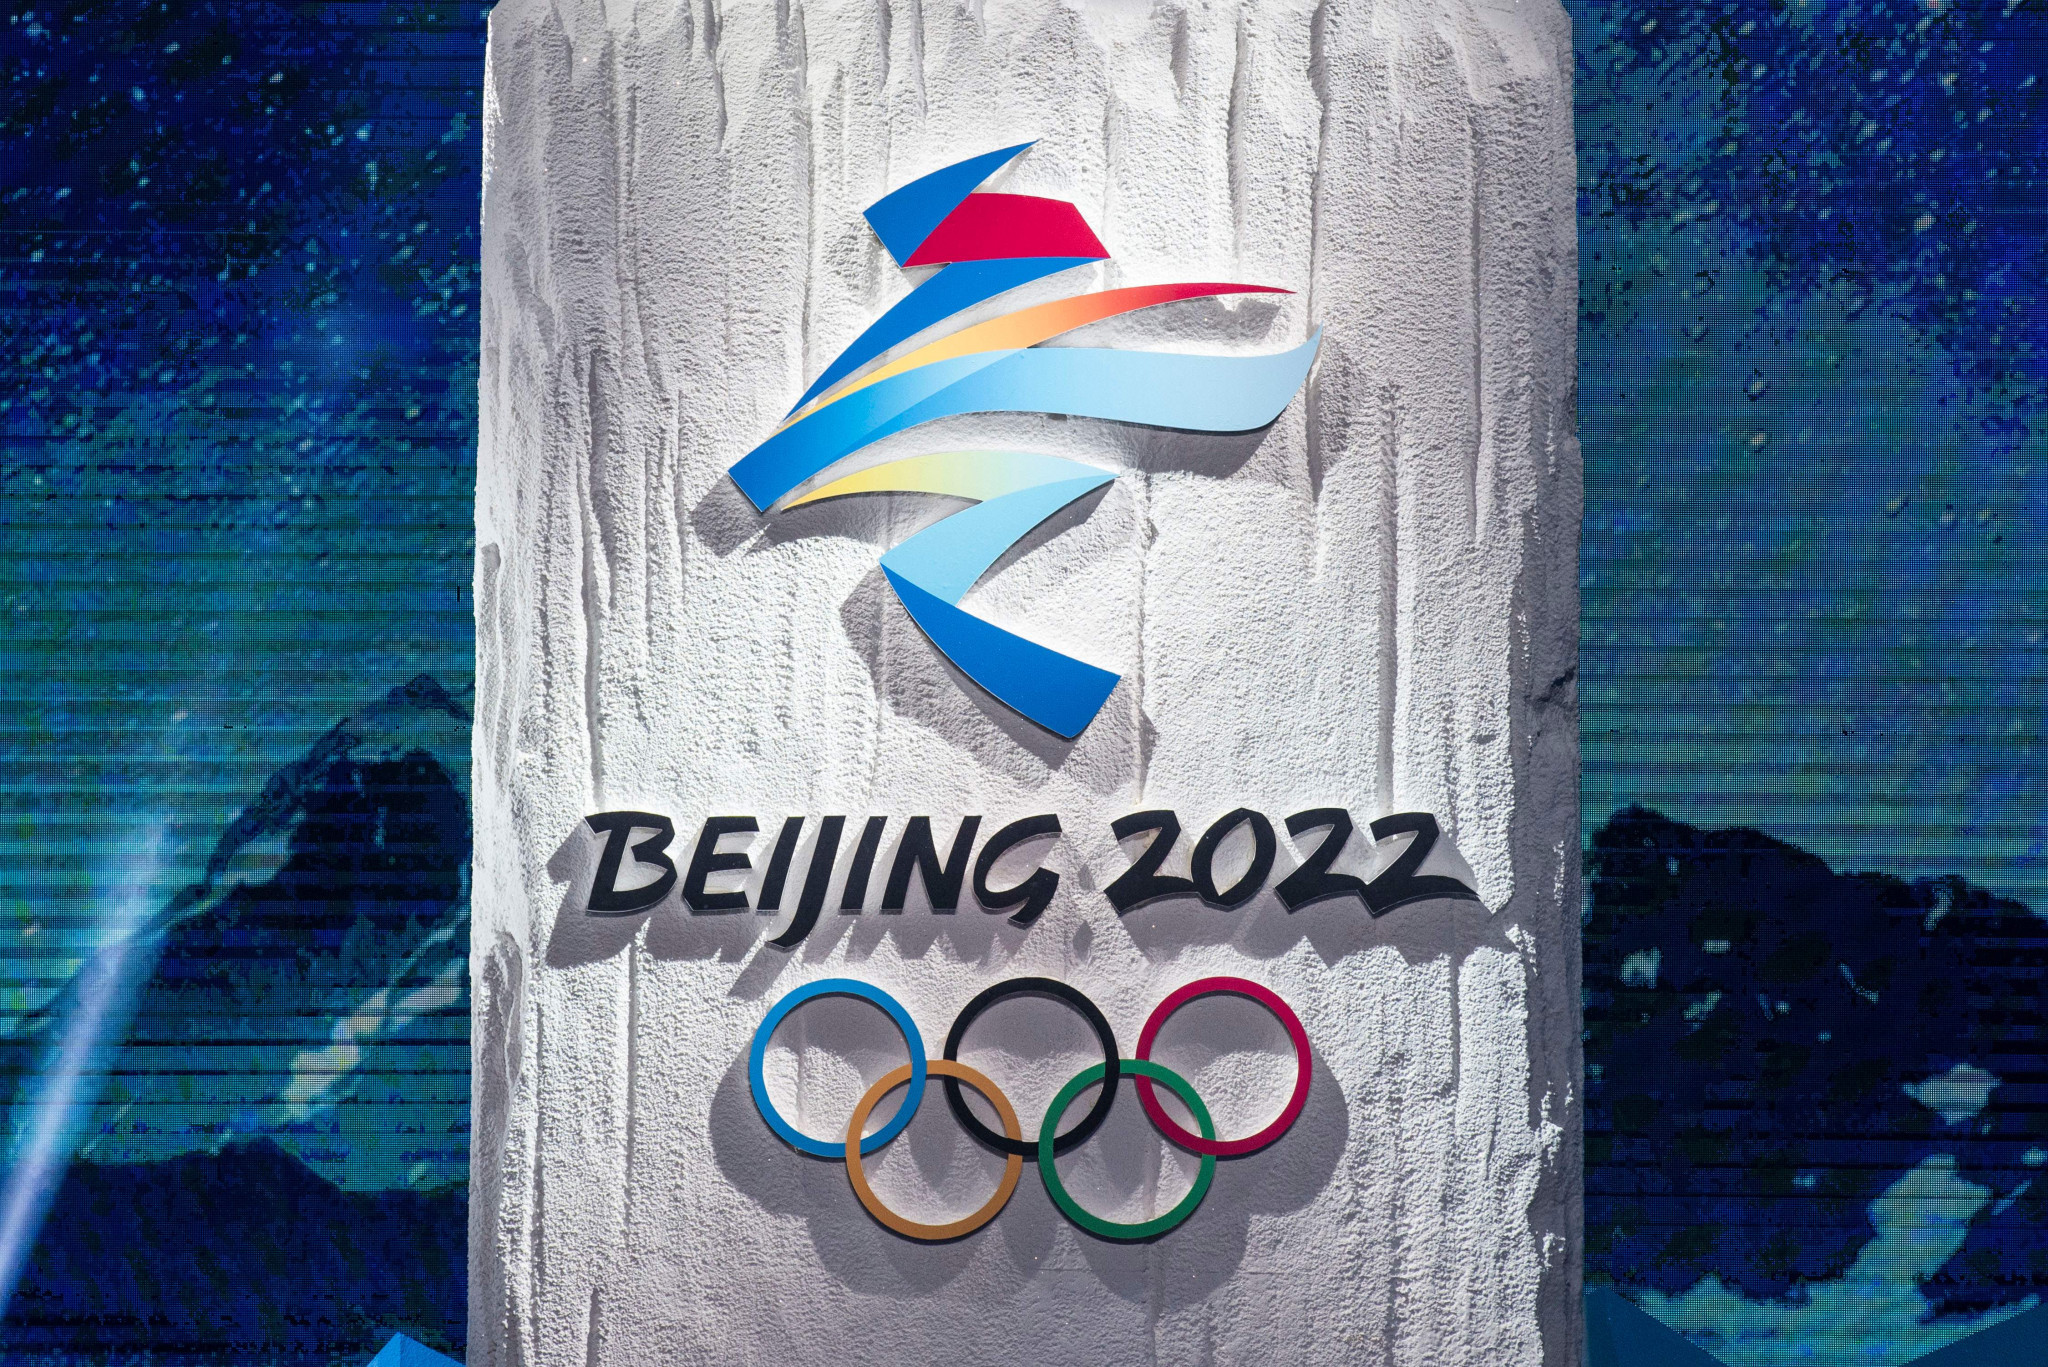 Beijing 2022 have attempted to play down environmental concerns before the Winter Olympics ©Getty Images